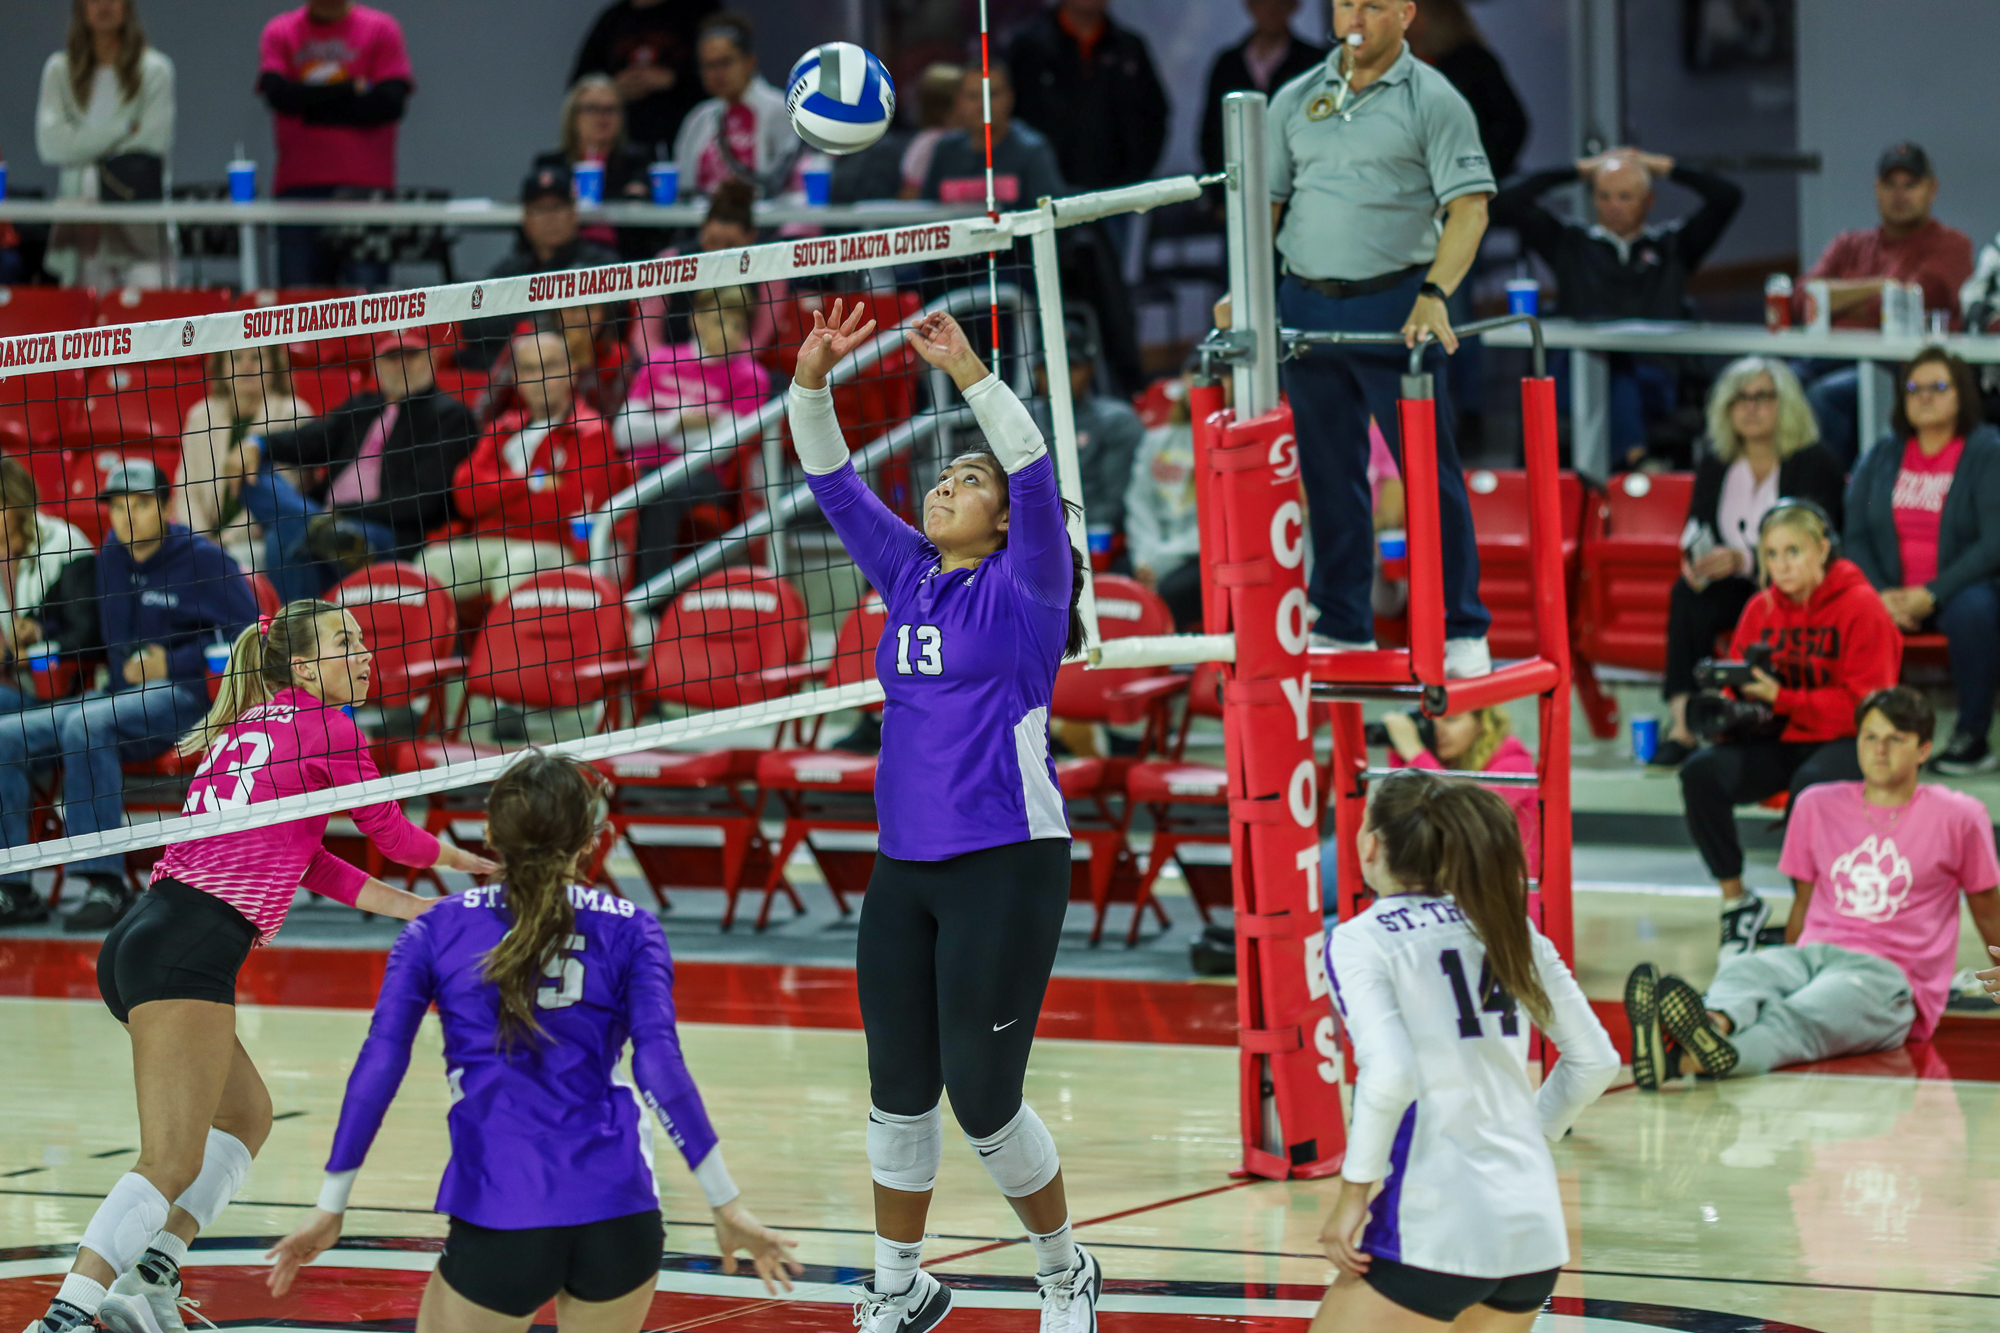 Keya Luta Win Hunt sets up a shot for her teams on the St. Thomas Volleyball Team in a match against the South Dakota Coyotes.